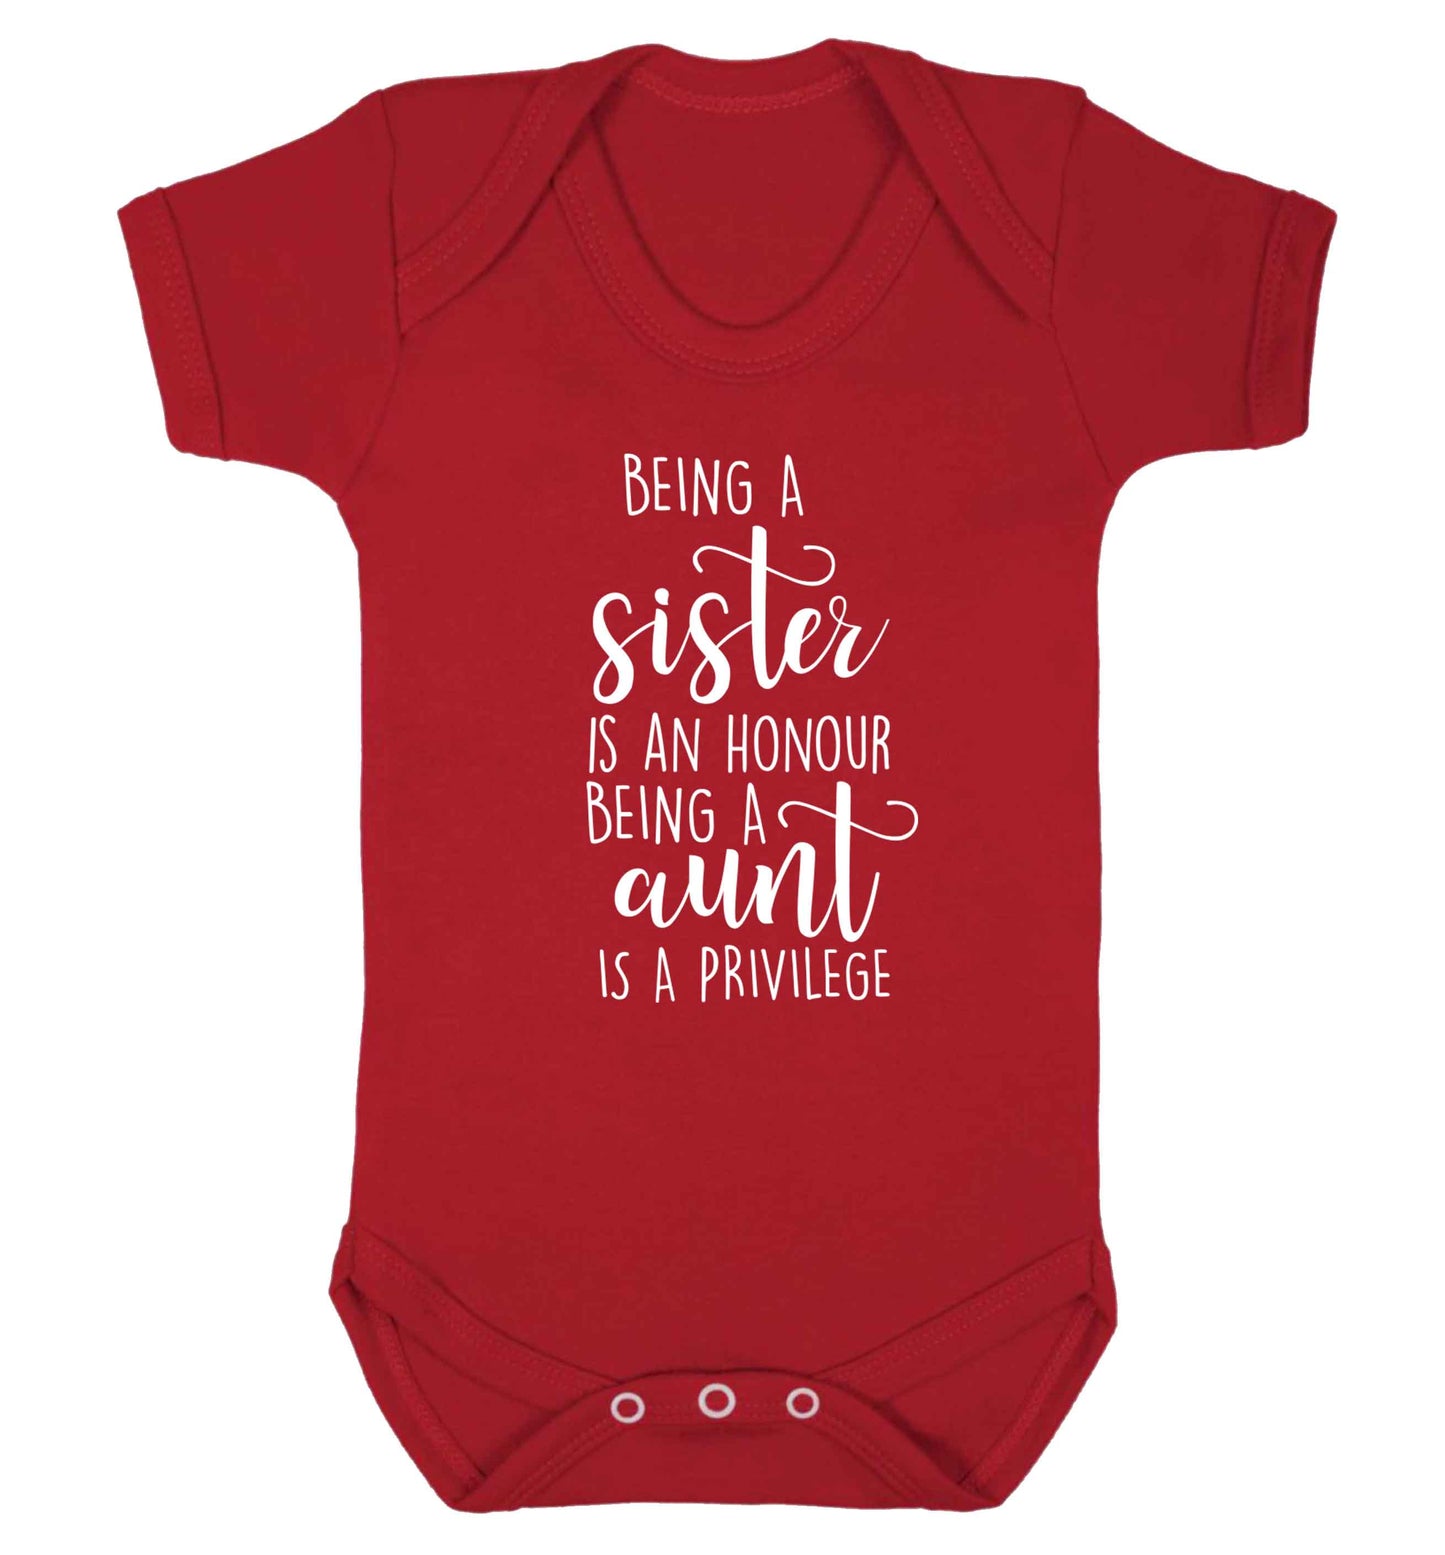 Being a sister is an honour being an auntie is a privilege Baby Vest red 18-24 months